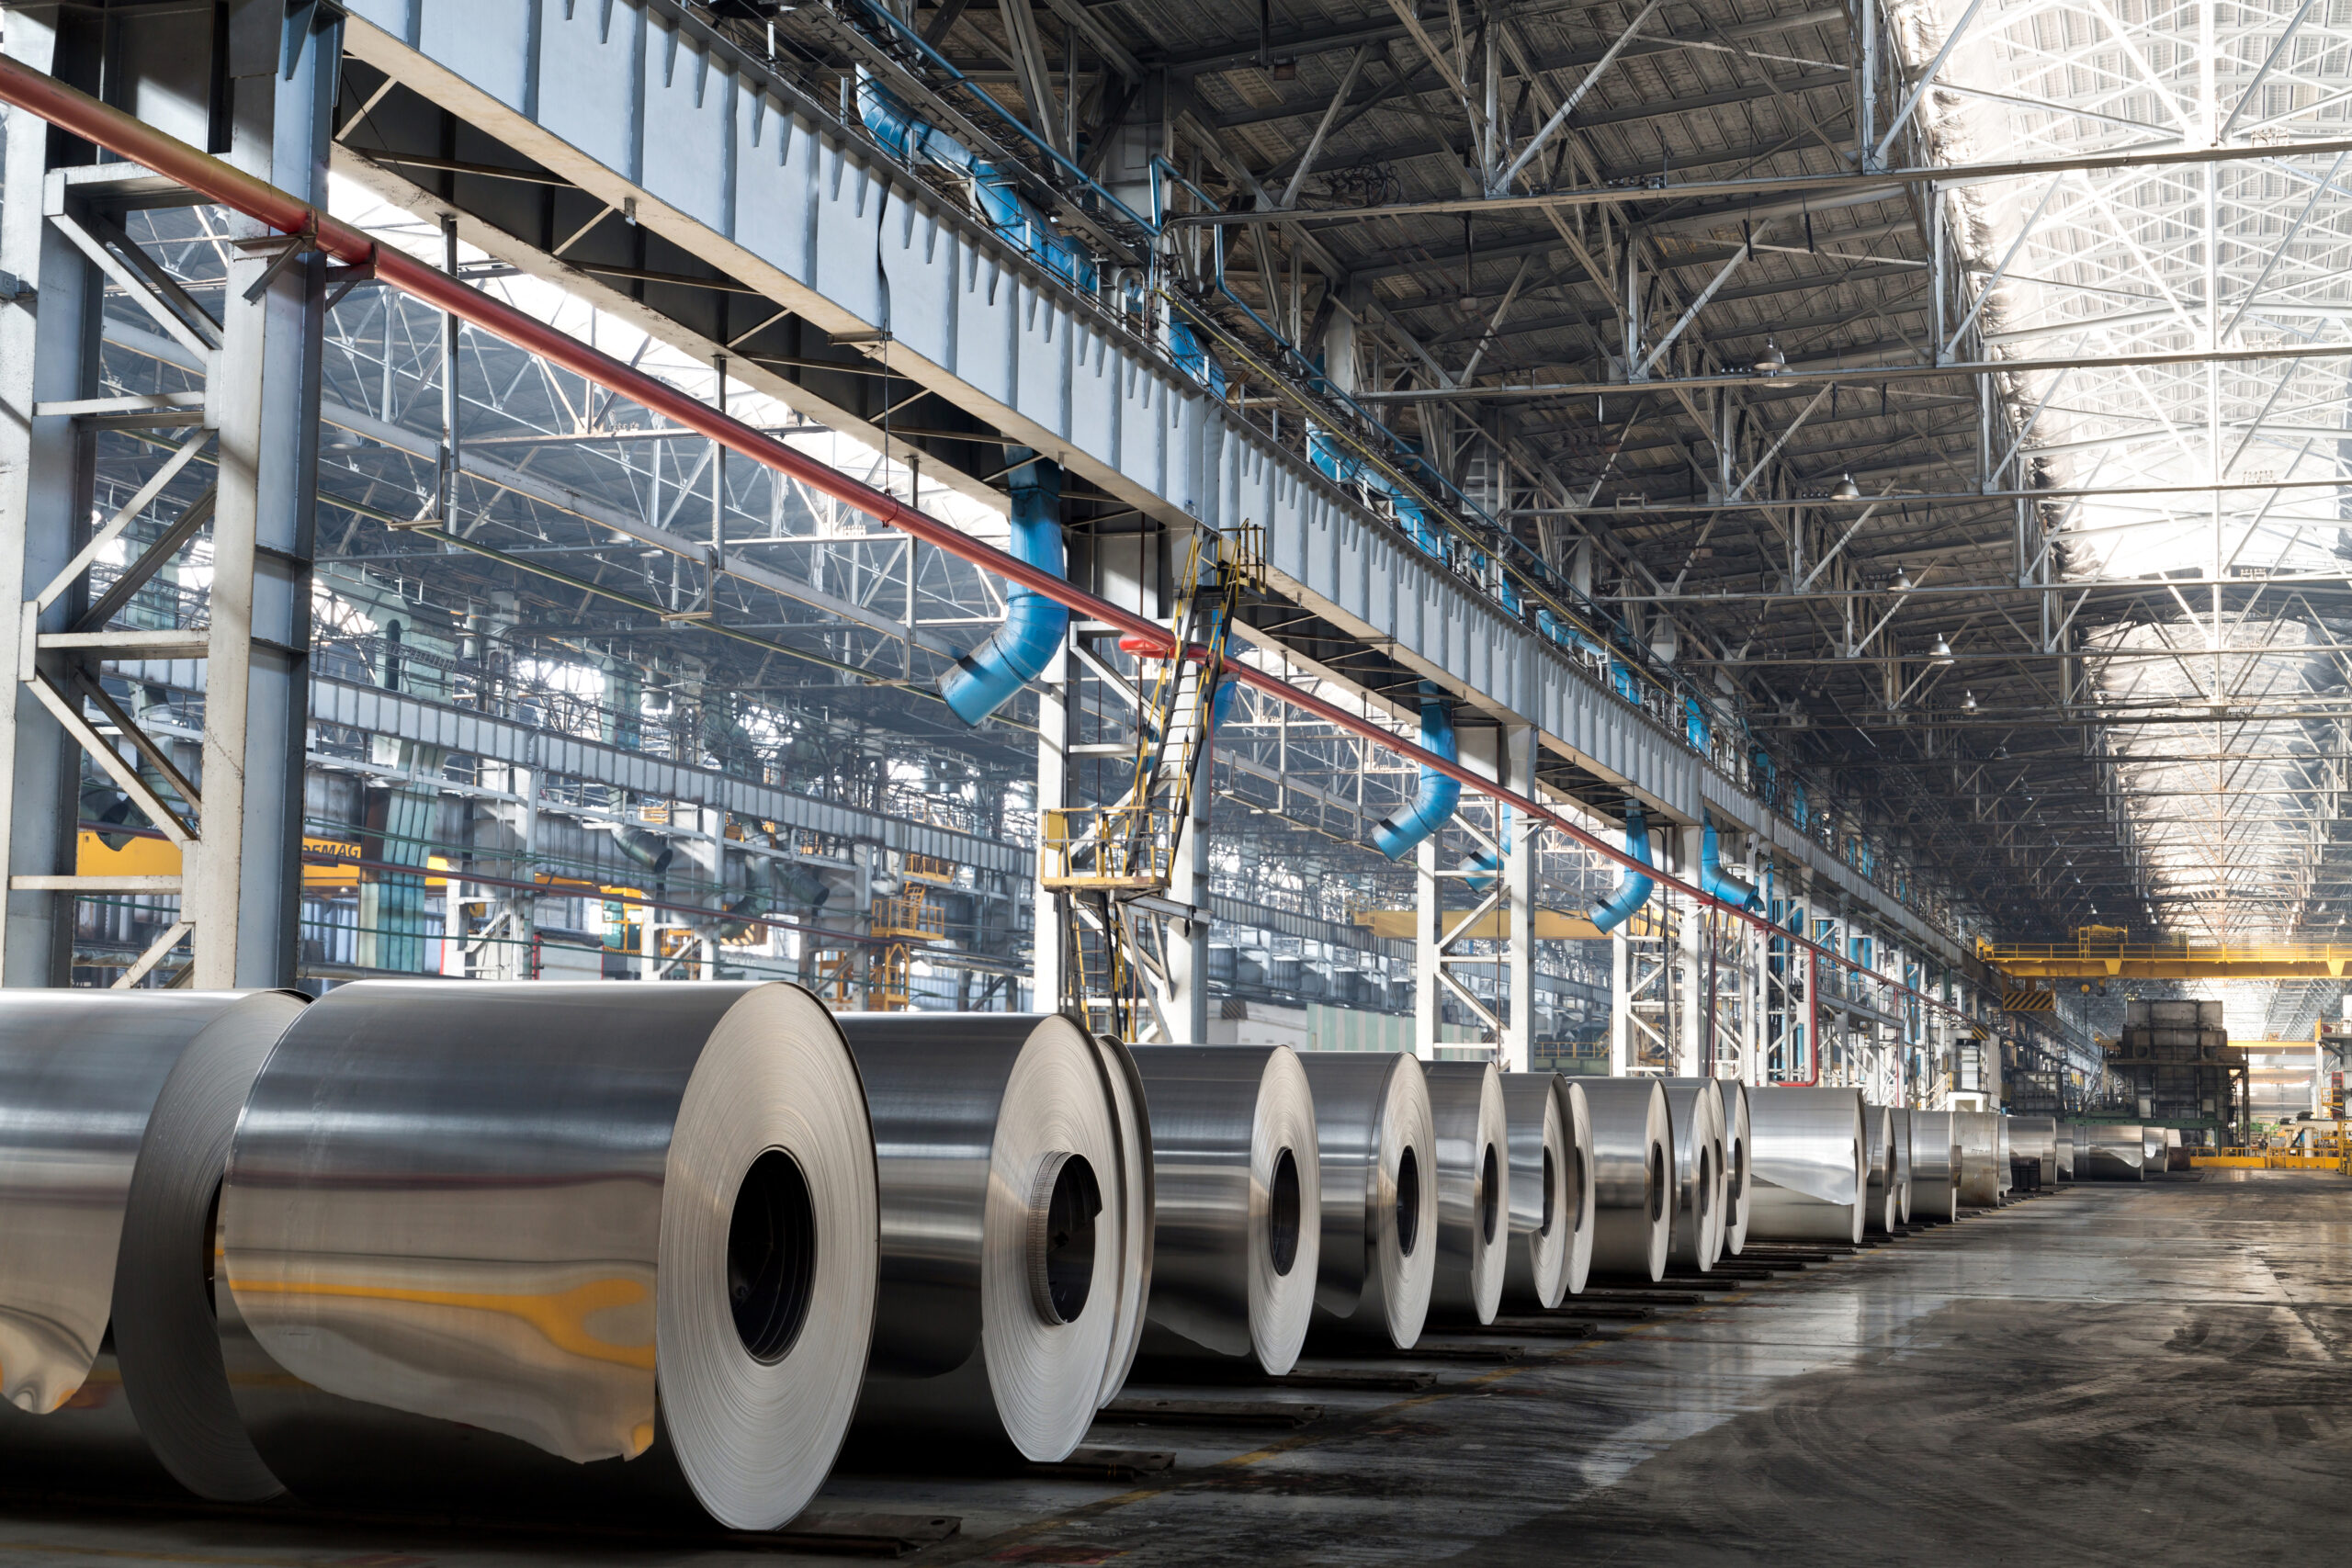 Long,Row,Of,Rolls,Of,Aluminum,In,Production,Shop,Of